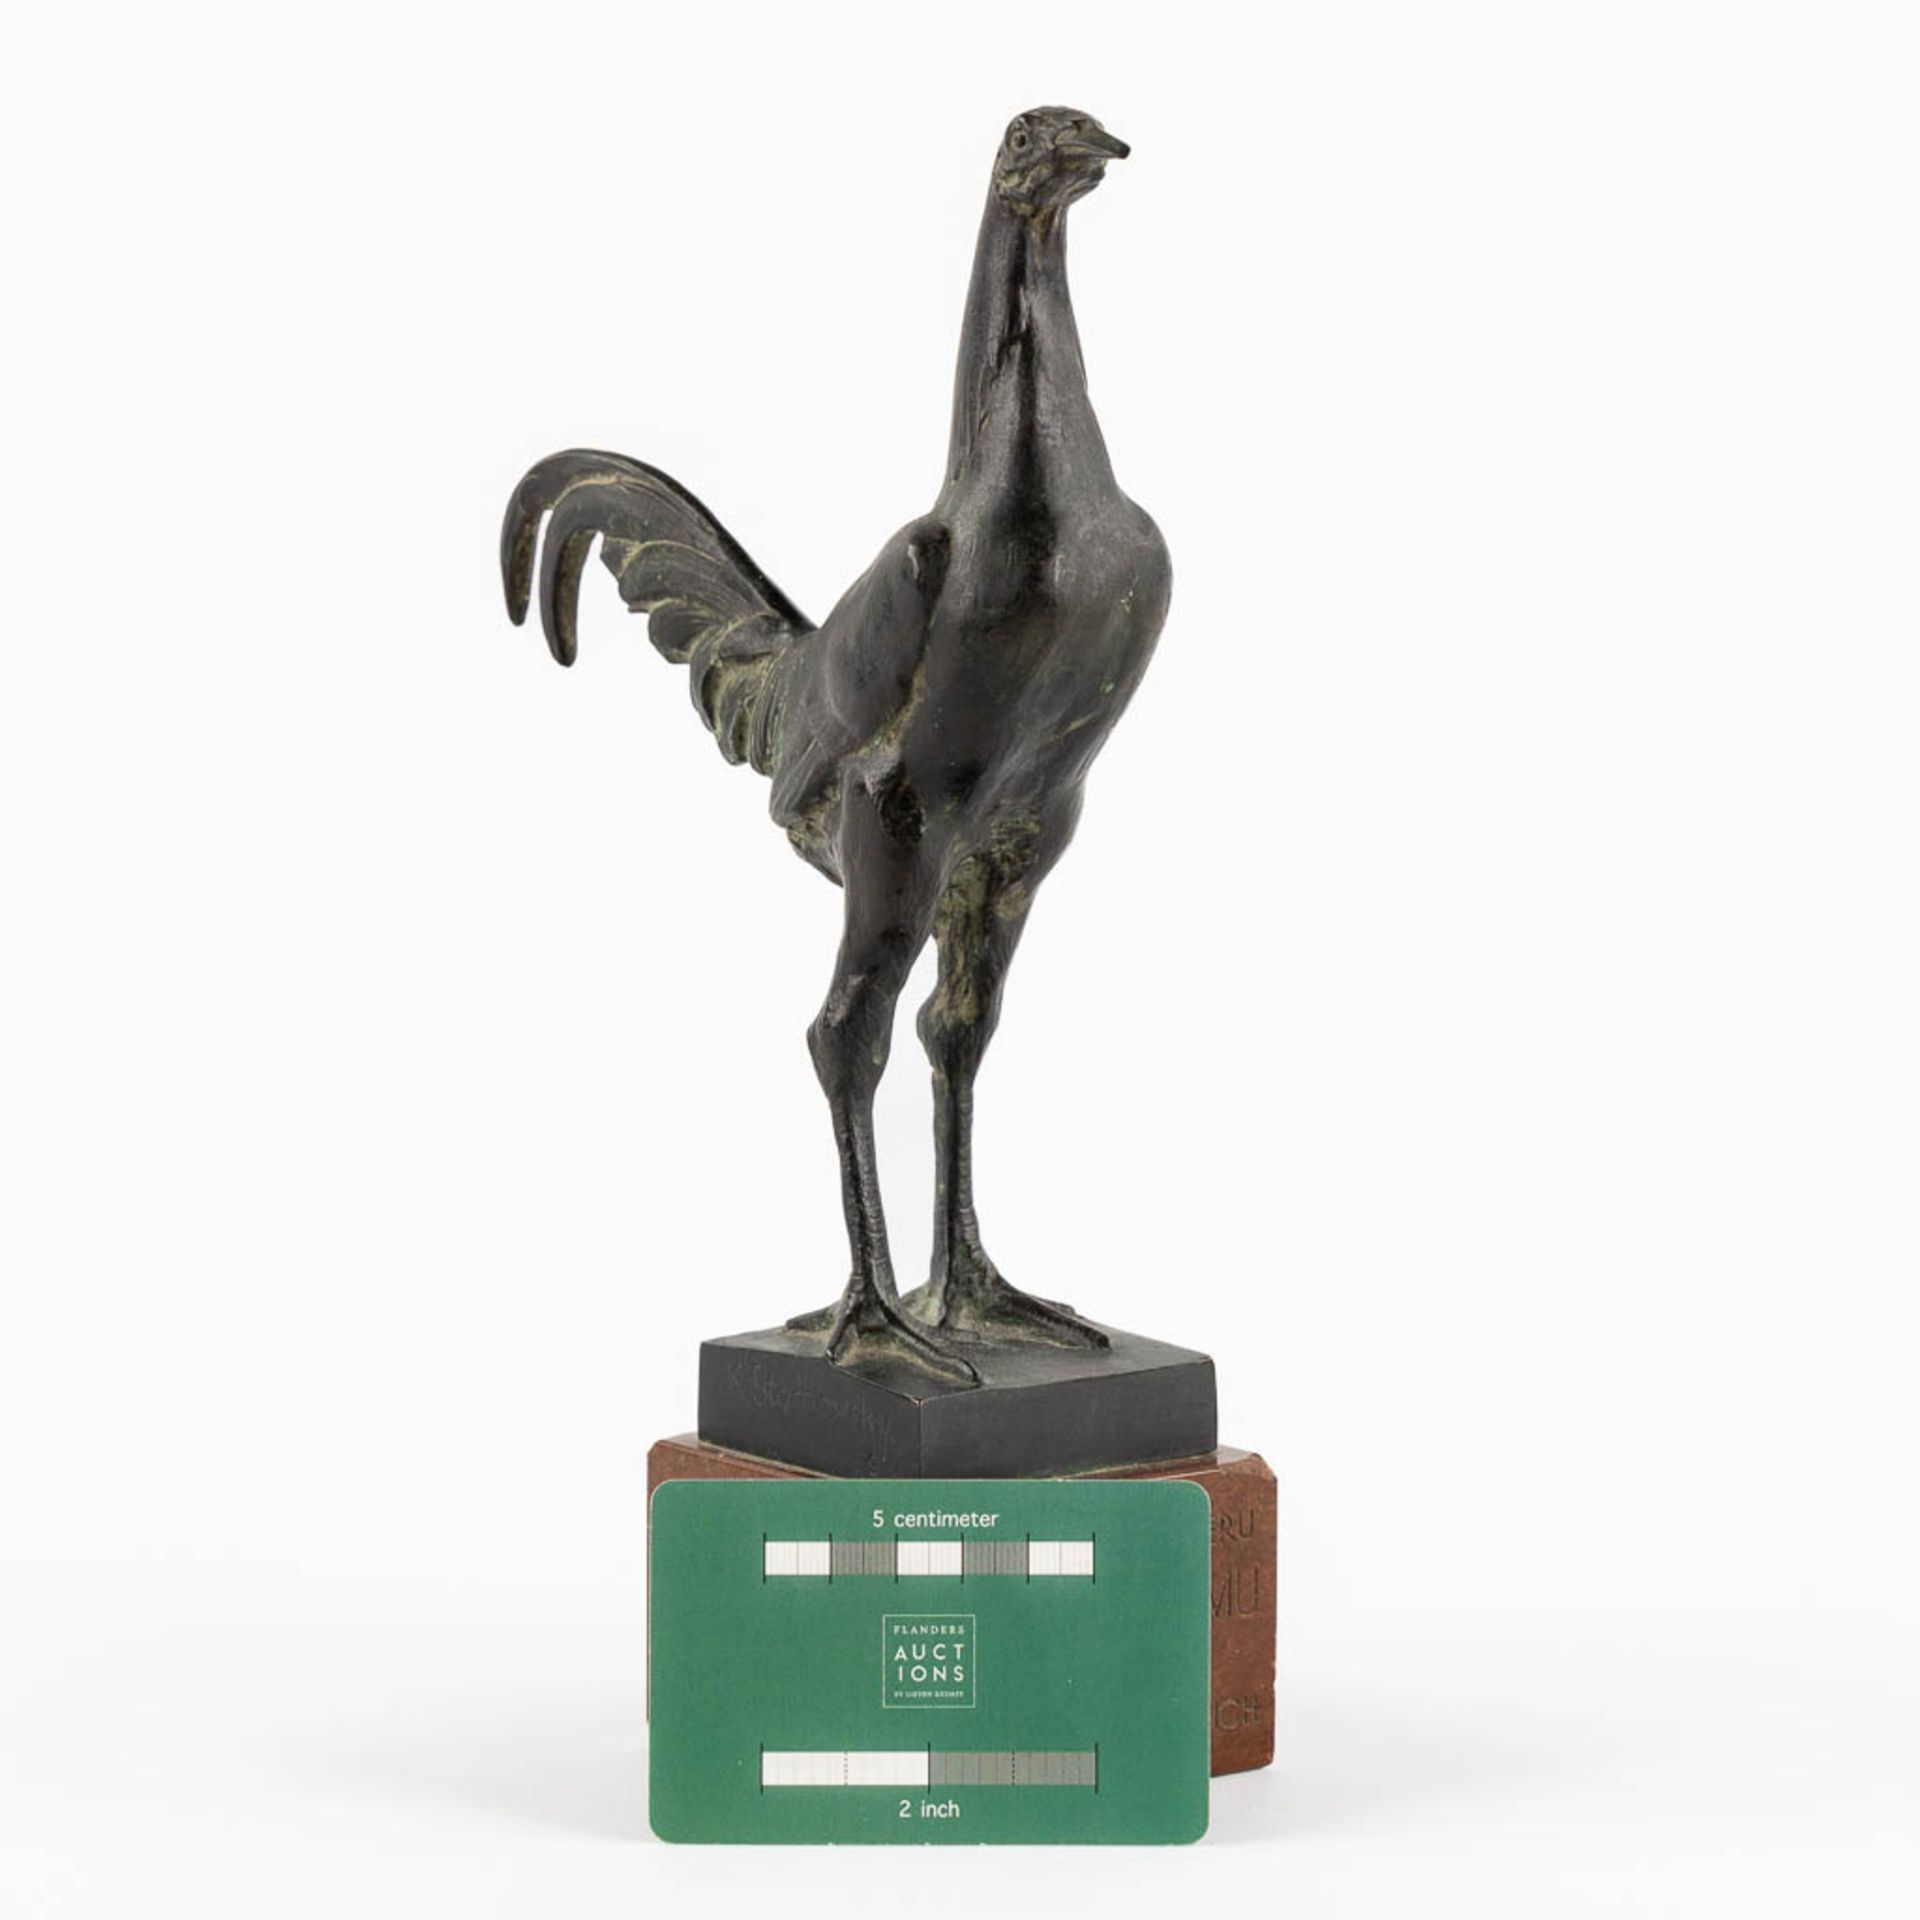 K. STACHOWSKY (XIX-XX) 'Rooster' patinated bronze on marble. (L:15 x W:7 x H:26 cm) - Image 2 of 11